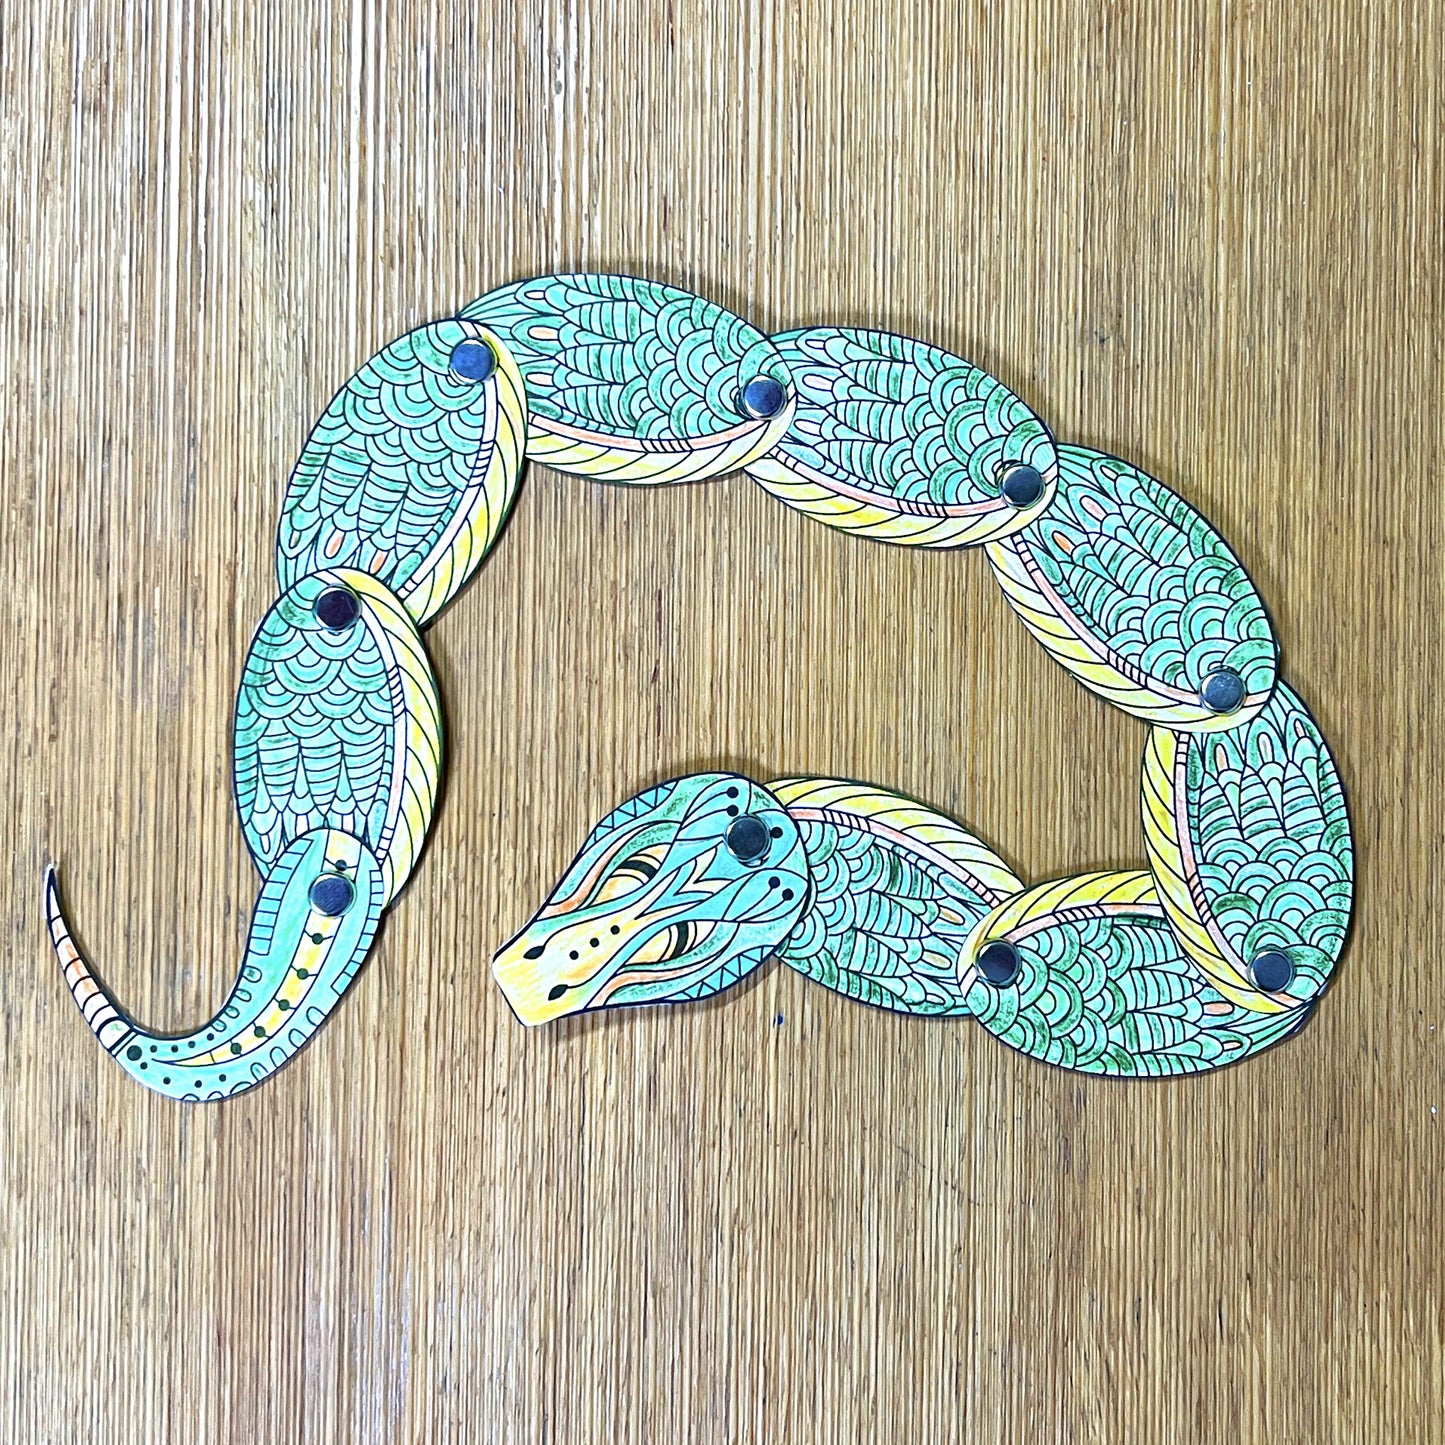 Cut & Color Split Pin Snake for Scissors and coloring Skills.